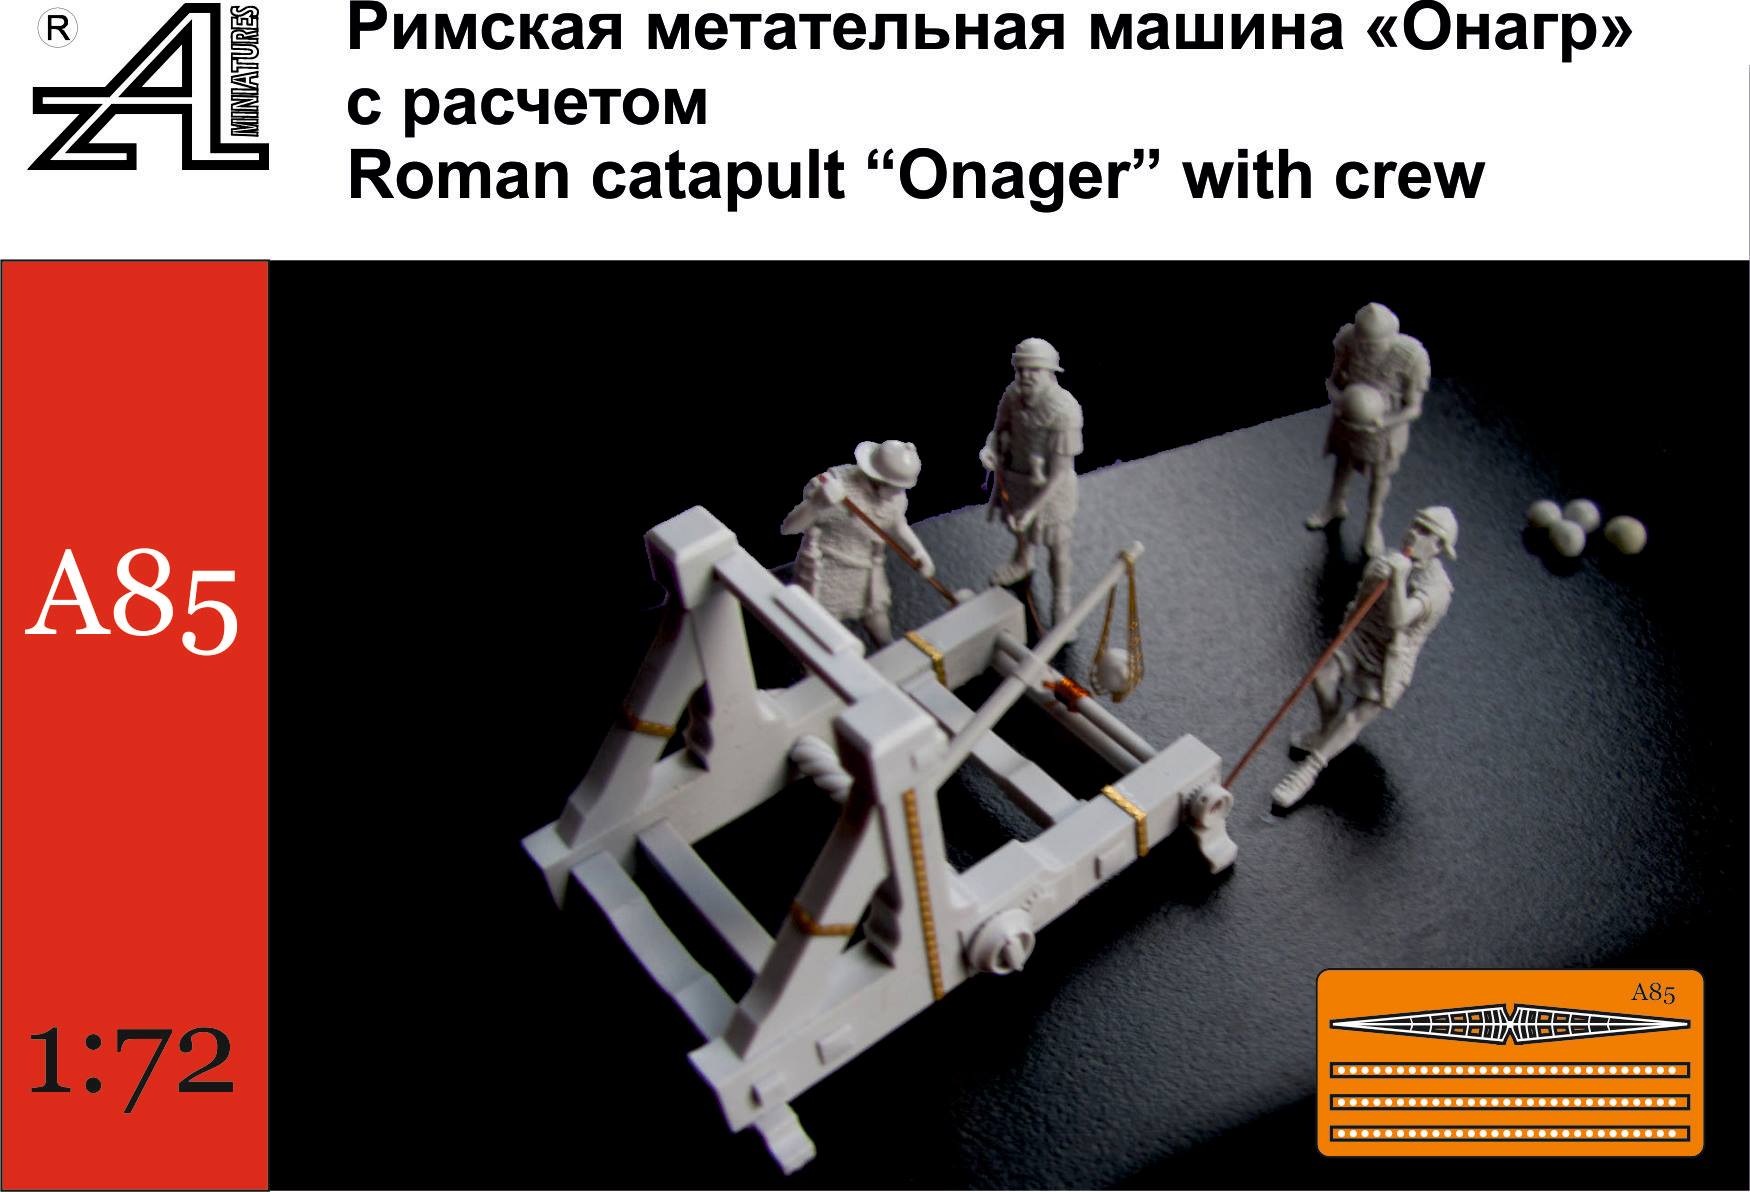 Roman catapult "Onager" with crew